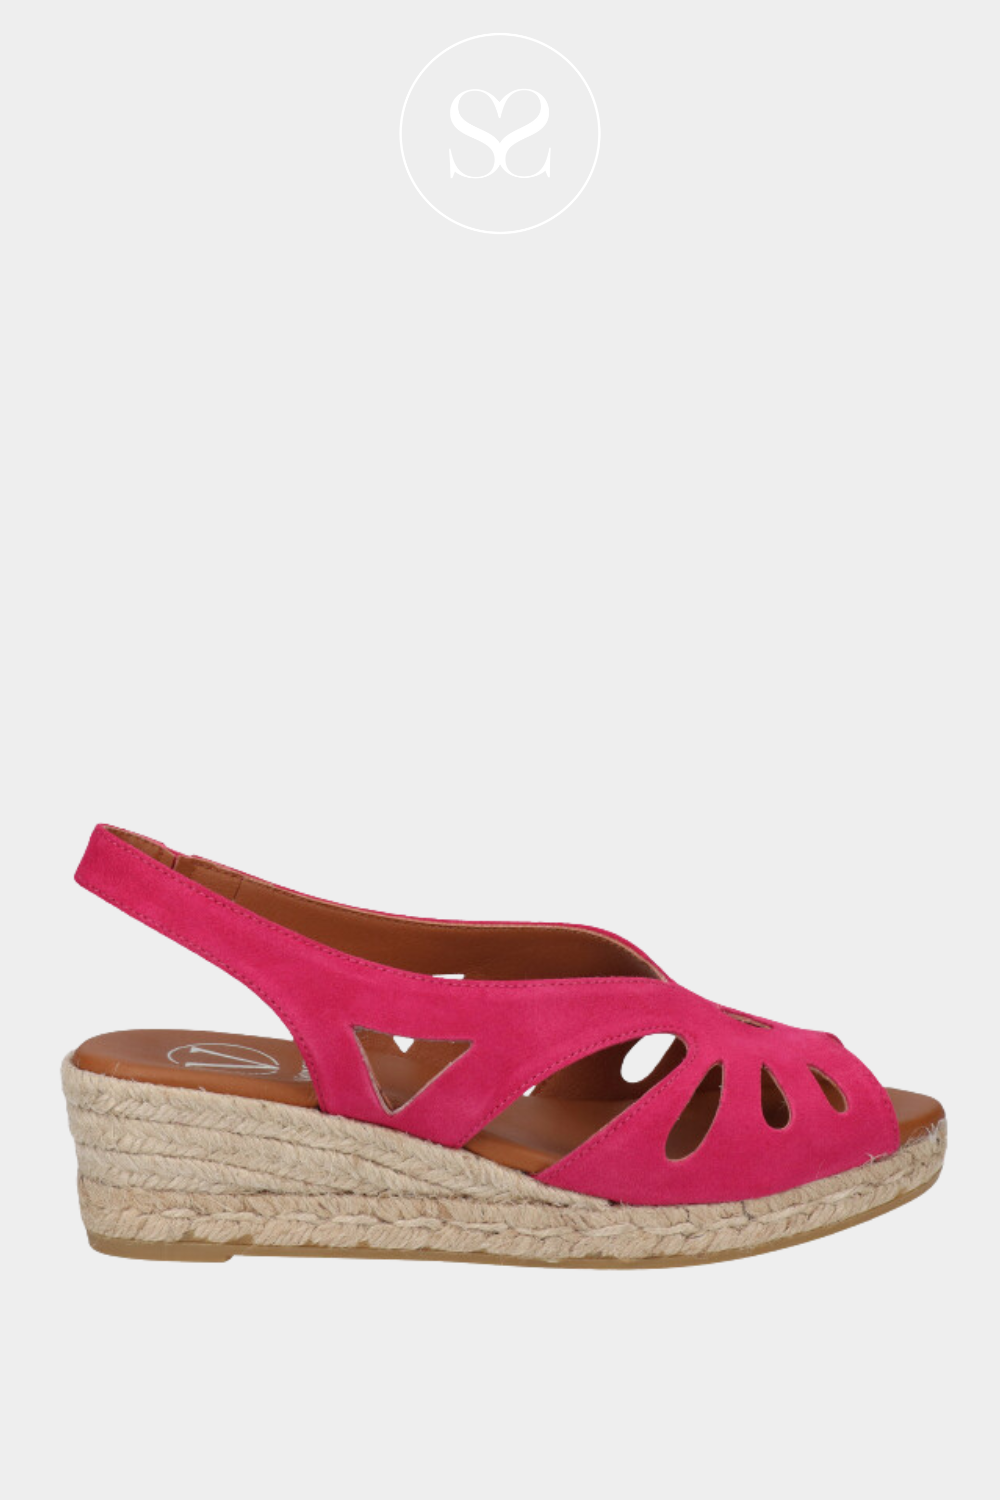 VIGUERA 2123 PINK SUEDE LOW HEEL WEDGE SANDALS WITH ELASTICATED SLINGBACK STRAP AND CUT OUT DETAILING AND  A PEEPTOE